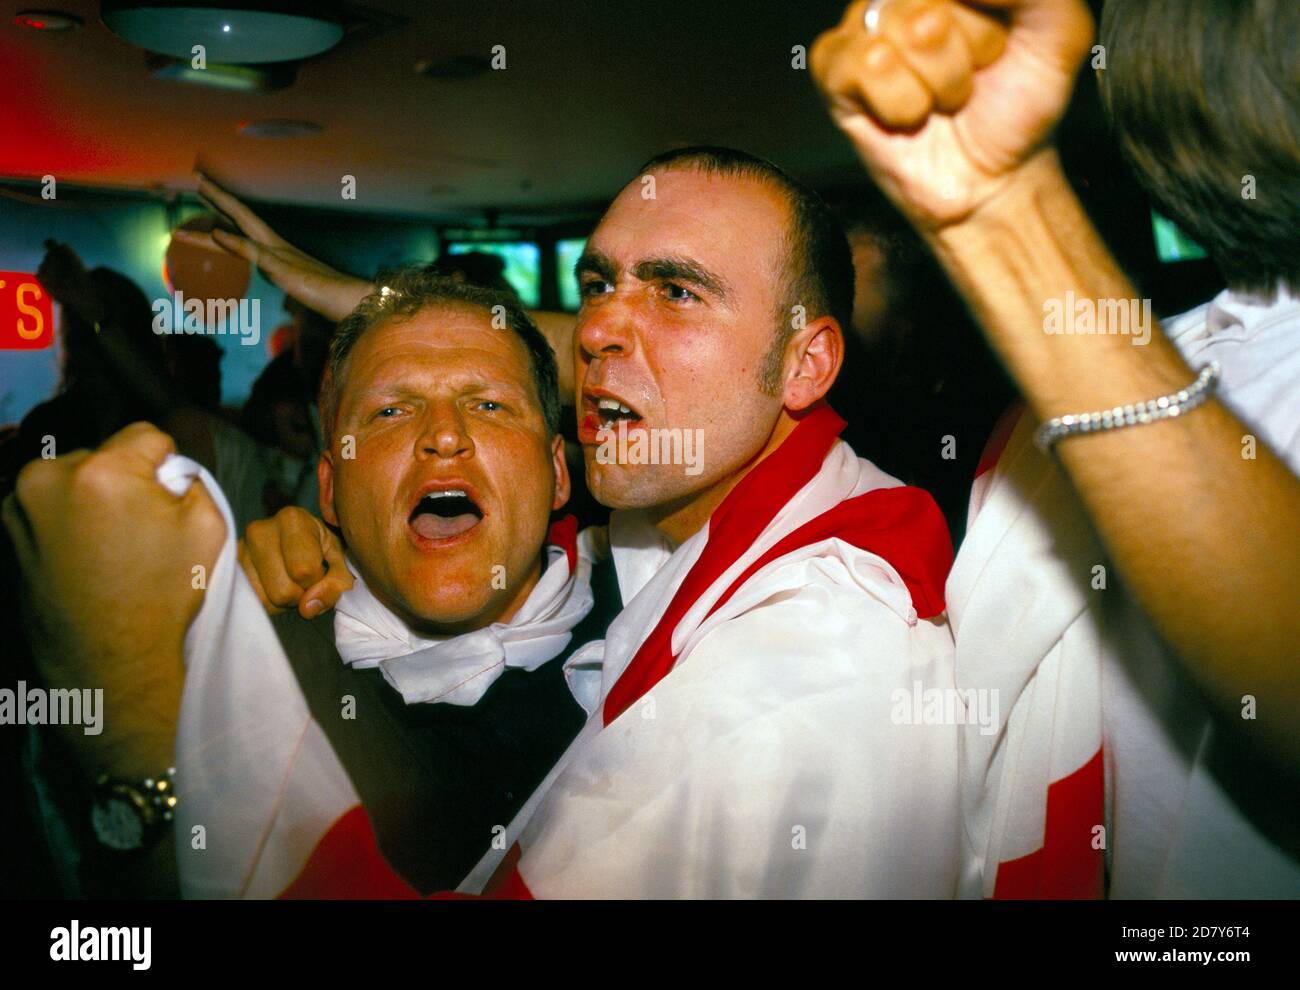 English football fans World Cup 1998. Supporters showing emotions watching a penalty shoot out between England and Argentina that decided the game, Argentina won 4–3 after two English kicks were saved. England was  knocked out of the World Cup. Watching on a multi screens in a television room of the Sports Bar, London 1990s UK HOMER SYKES Stock Photo